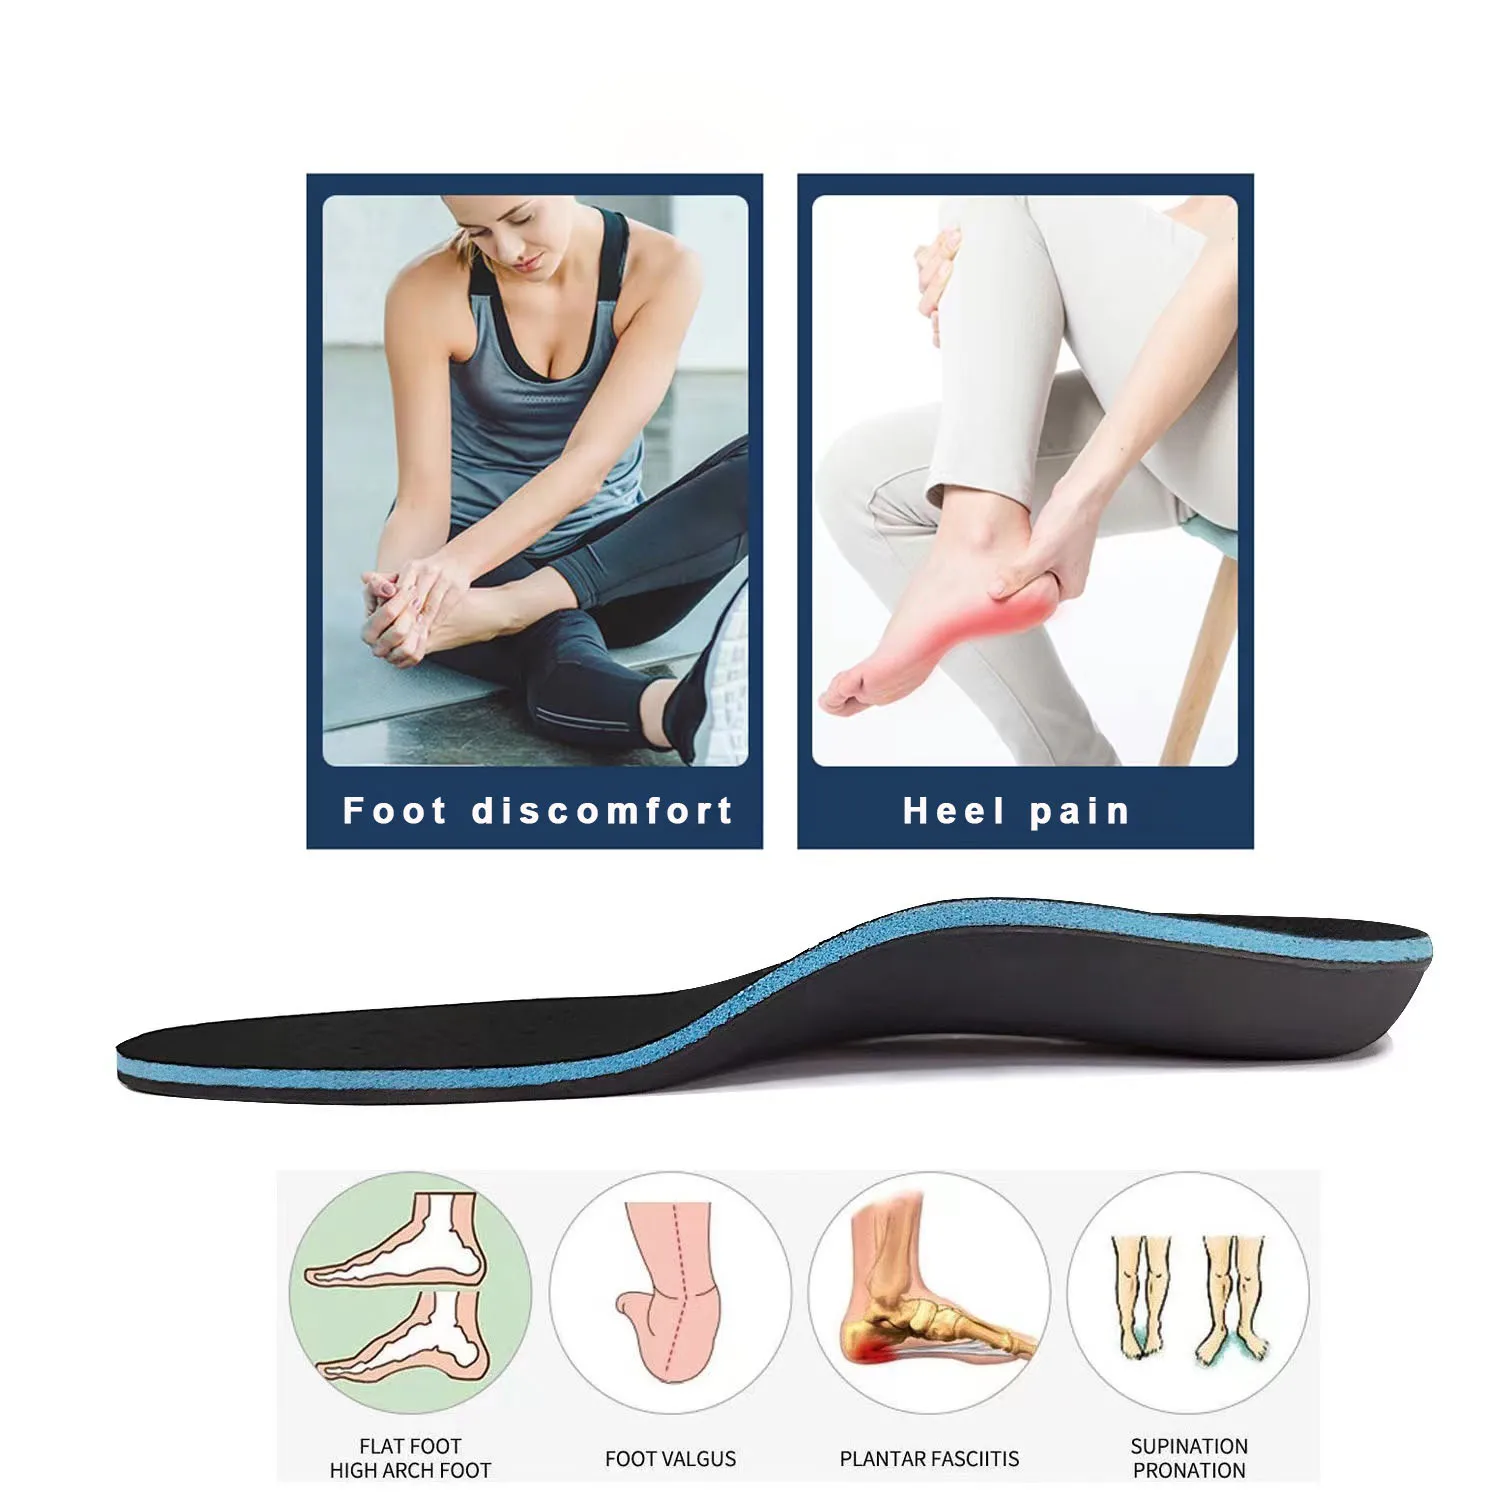 3cm arch support orthopedic insoles for men with flat feet XO-leg casual sports insoles to improve foot inversion